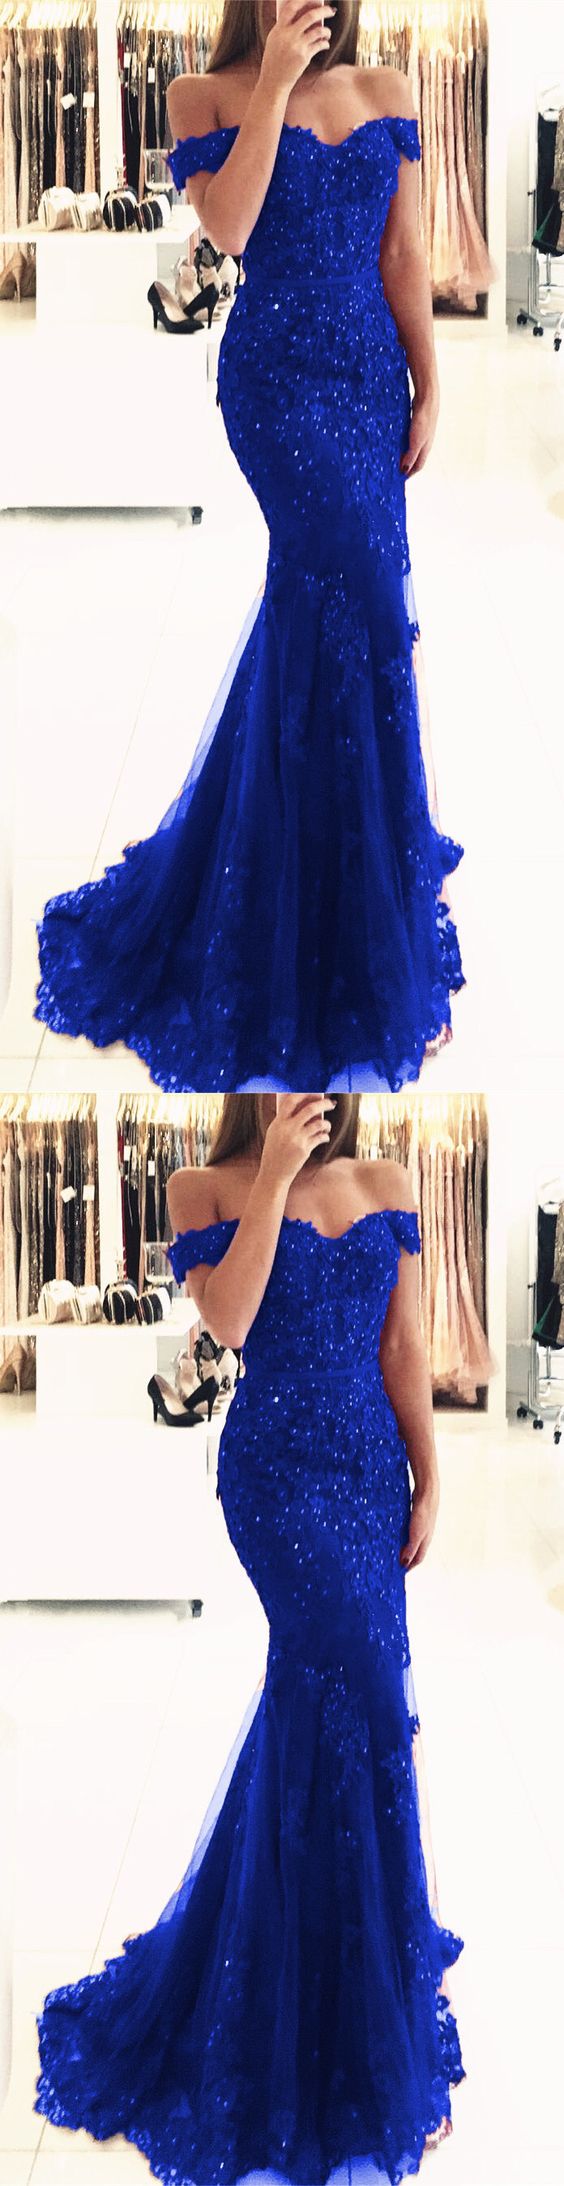 royal blue lace mermaid evening dress off the shoulder prom dress cg2022